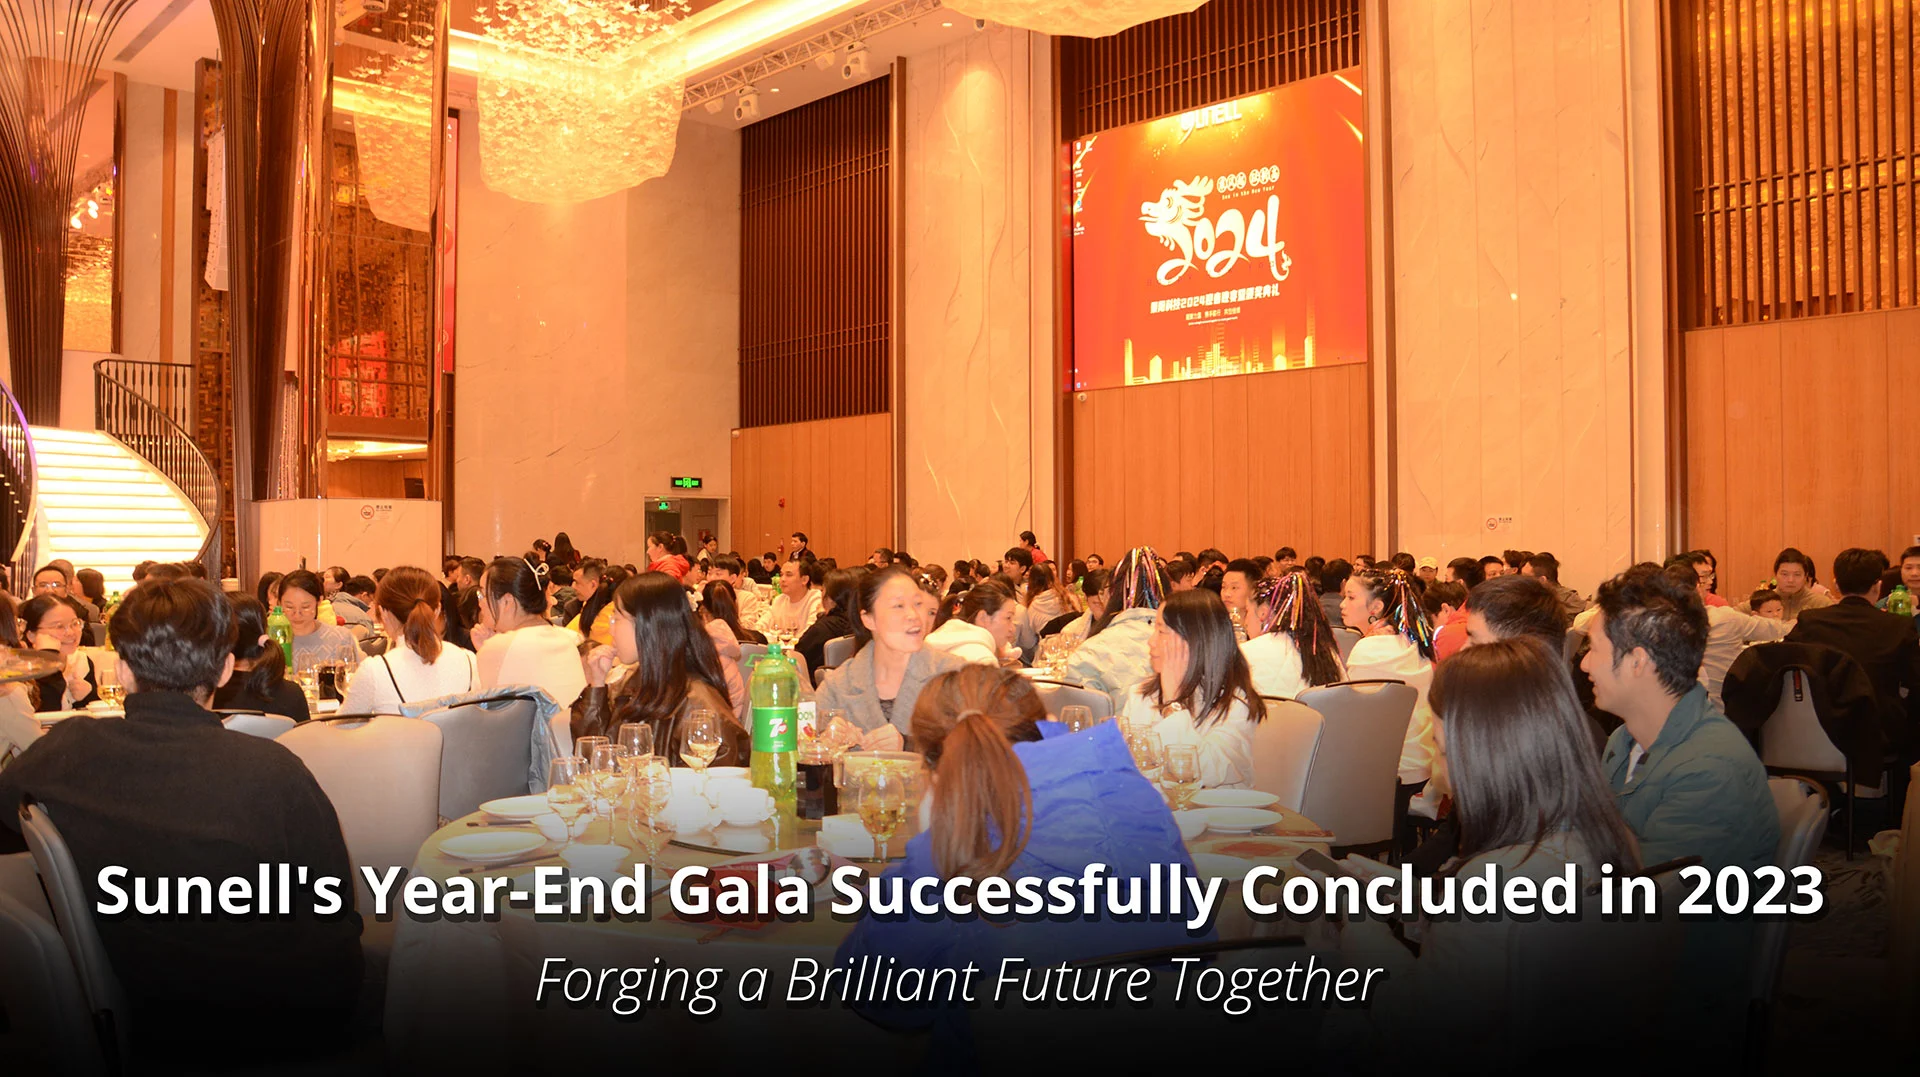 Sunell's Year-End Gala Successfully Concluded in 2023, Forging a Brilliant Future Together